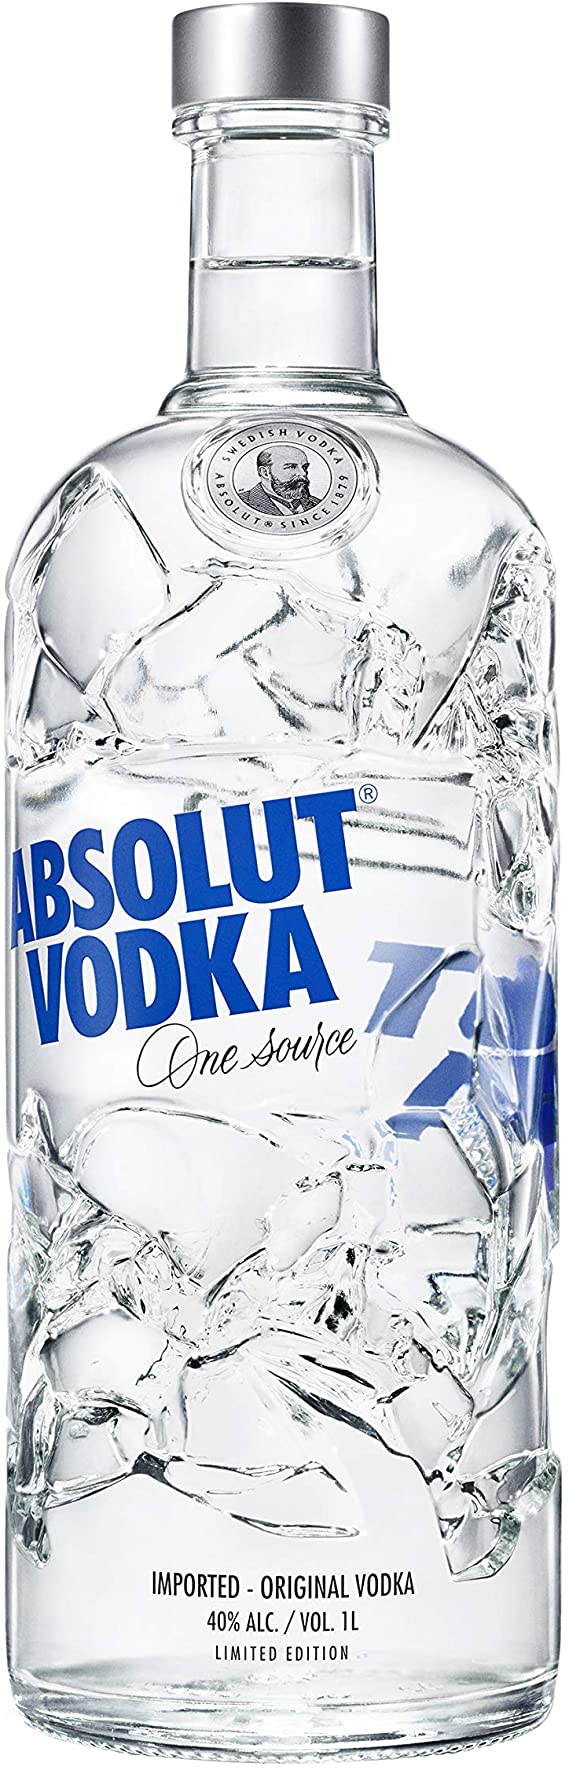 Absolut Vodka Recycled Limited Edition Bottle, 1 Litre